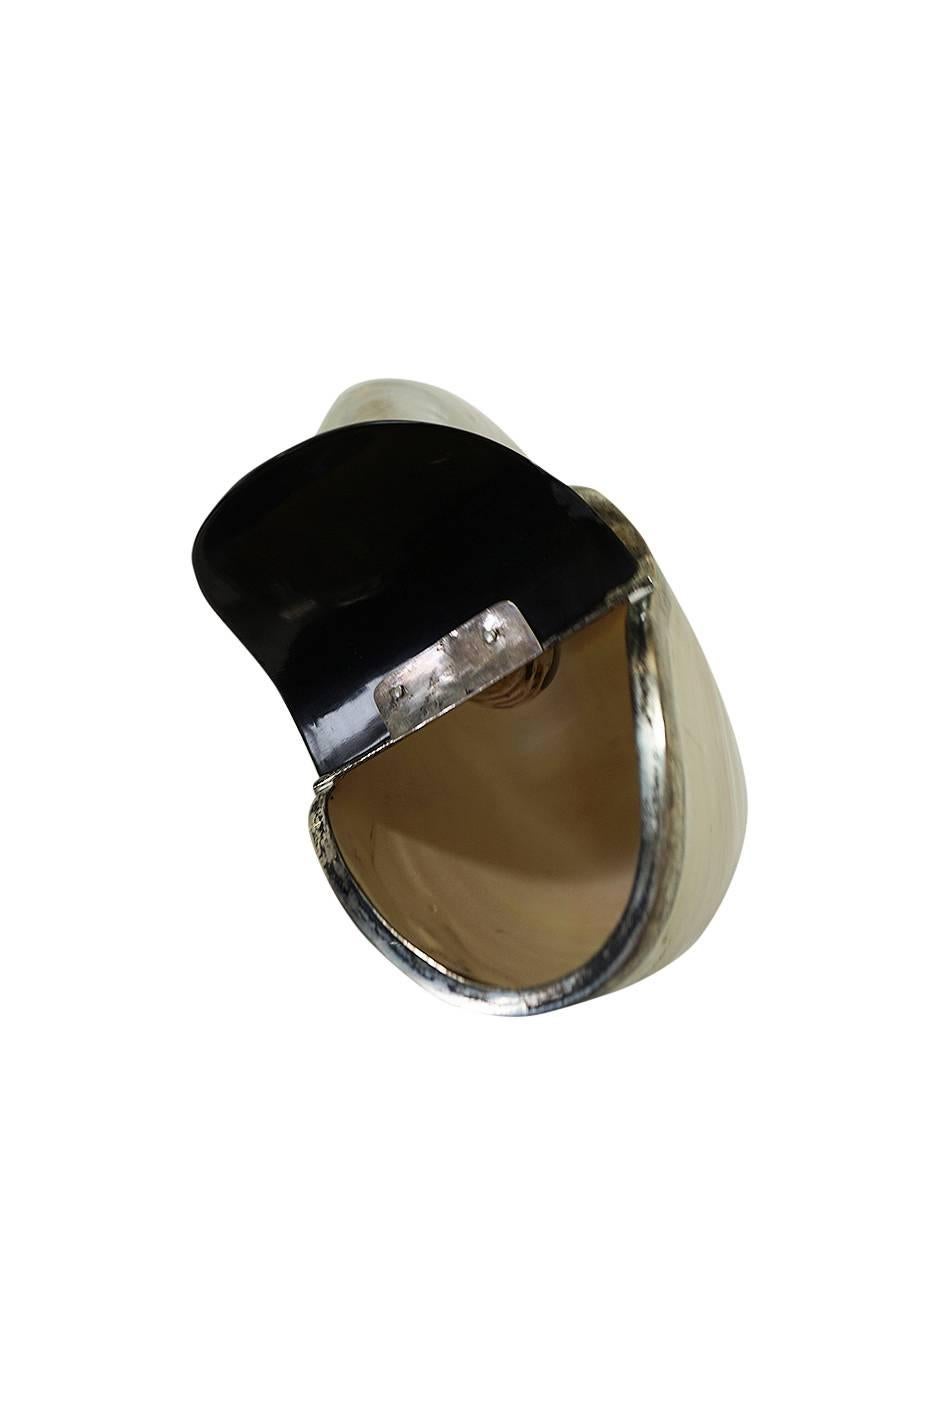 This is so unusual and beautiful and it is definitely not a bag you will see every day. A very large and beautiful sea shell has been glossed and coated to be made into a minaudiere. It has a combination of silver and a shaped black hinge opening